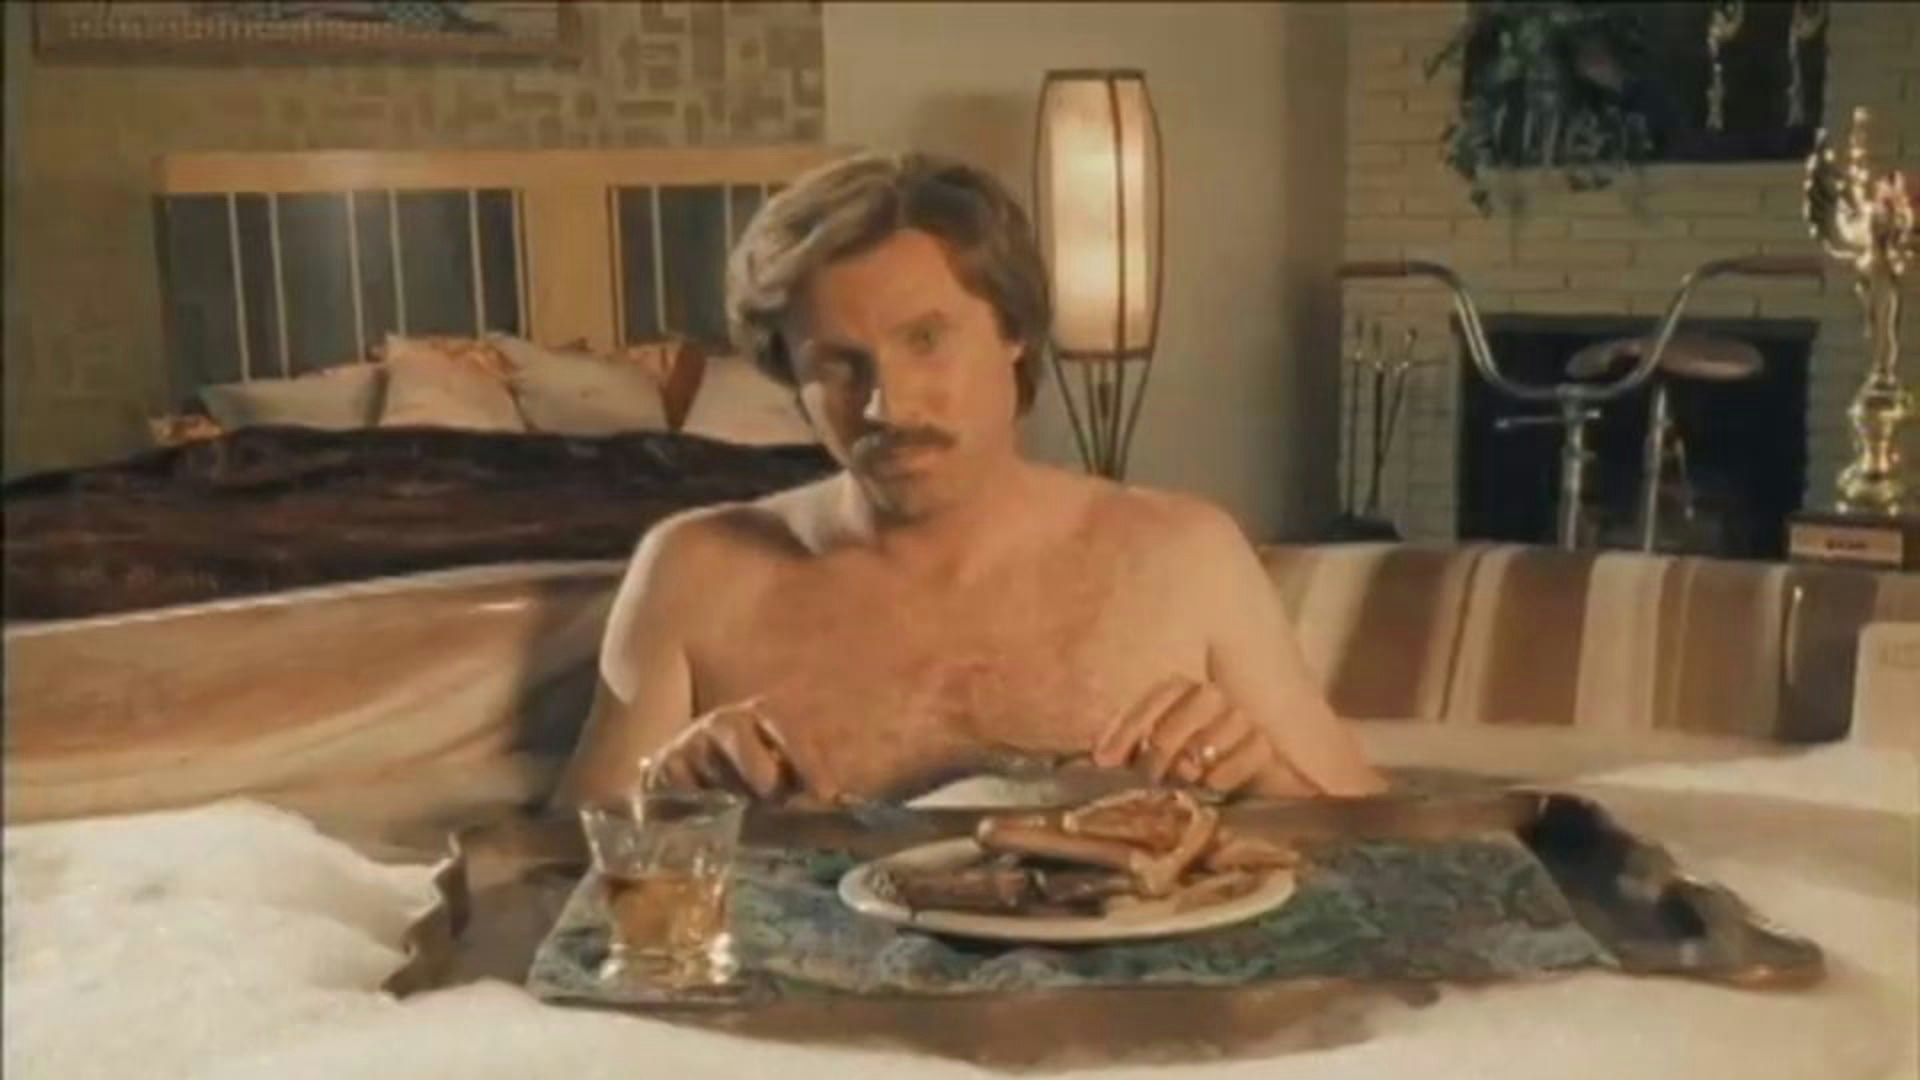 Afternoon Delight - Anchorman Ron Burgundy